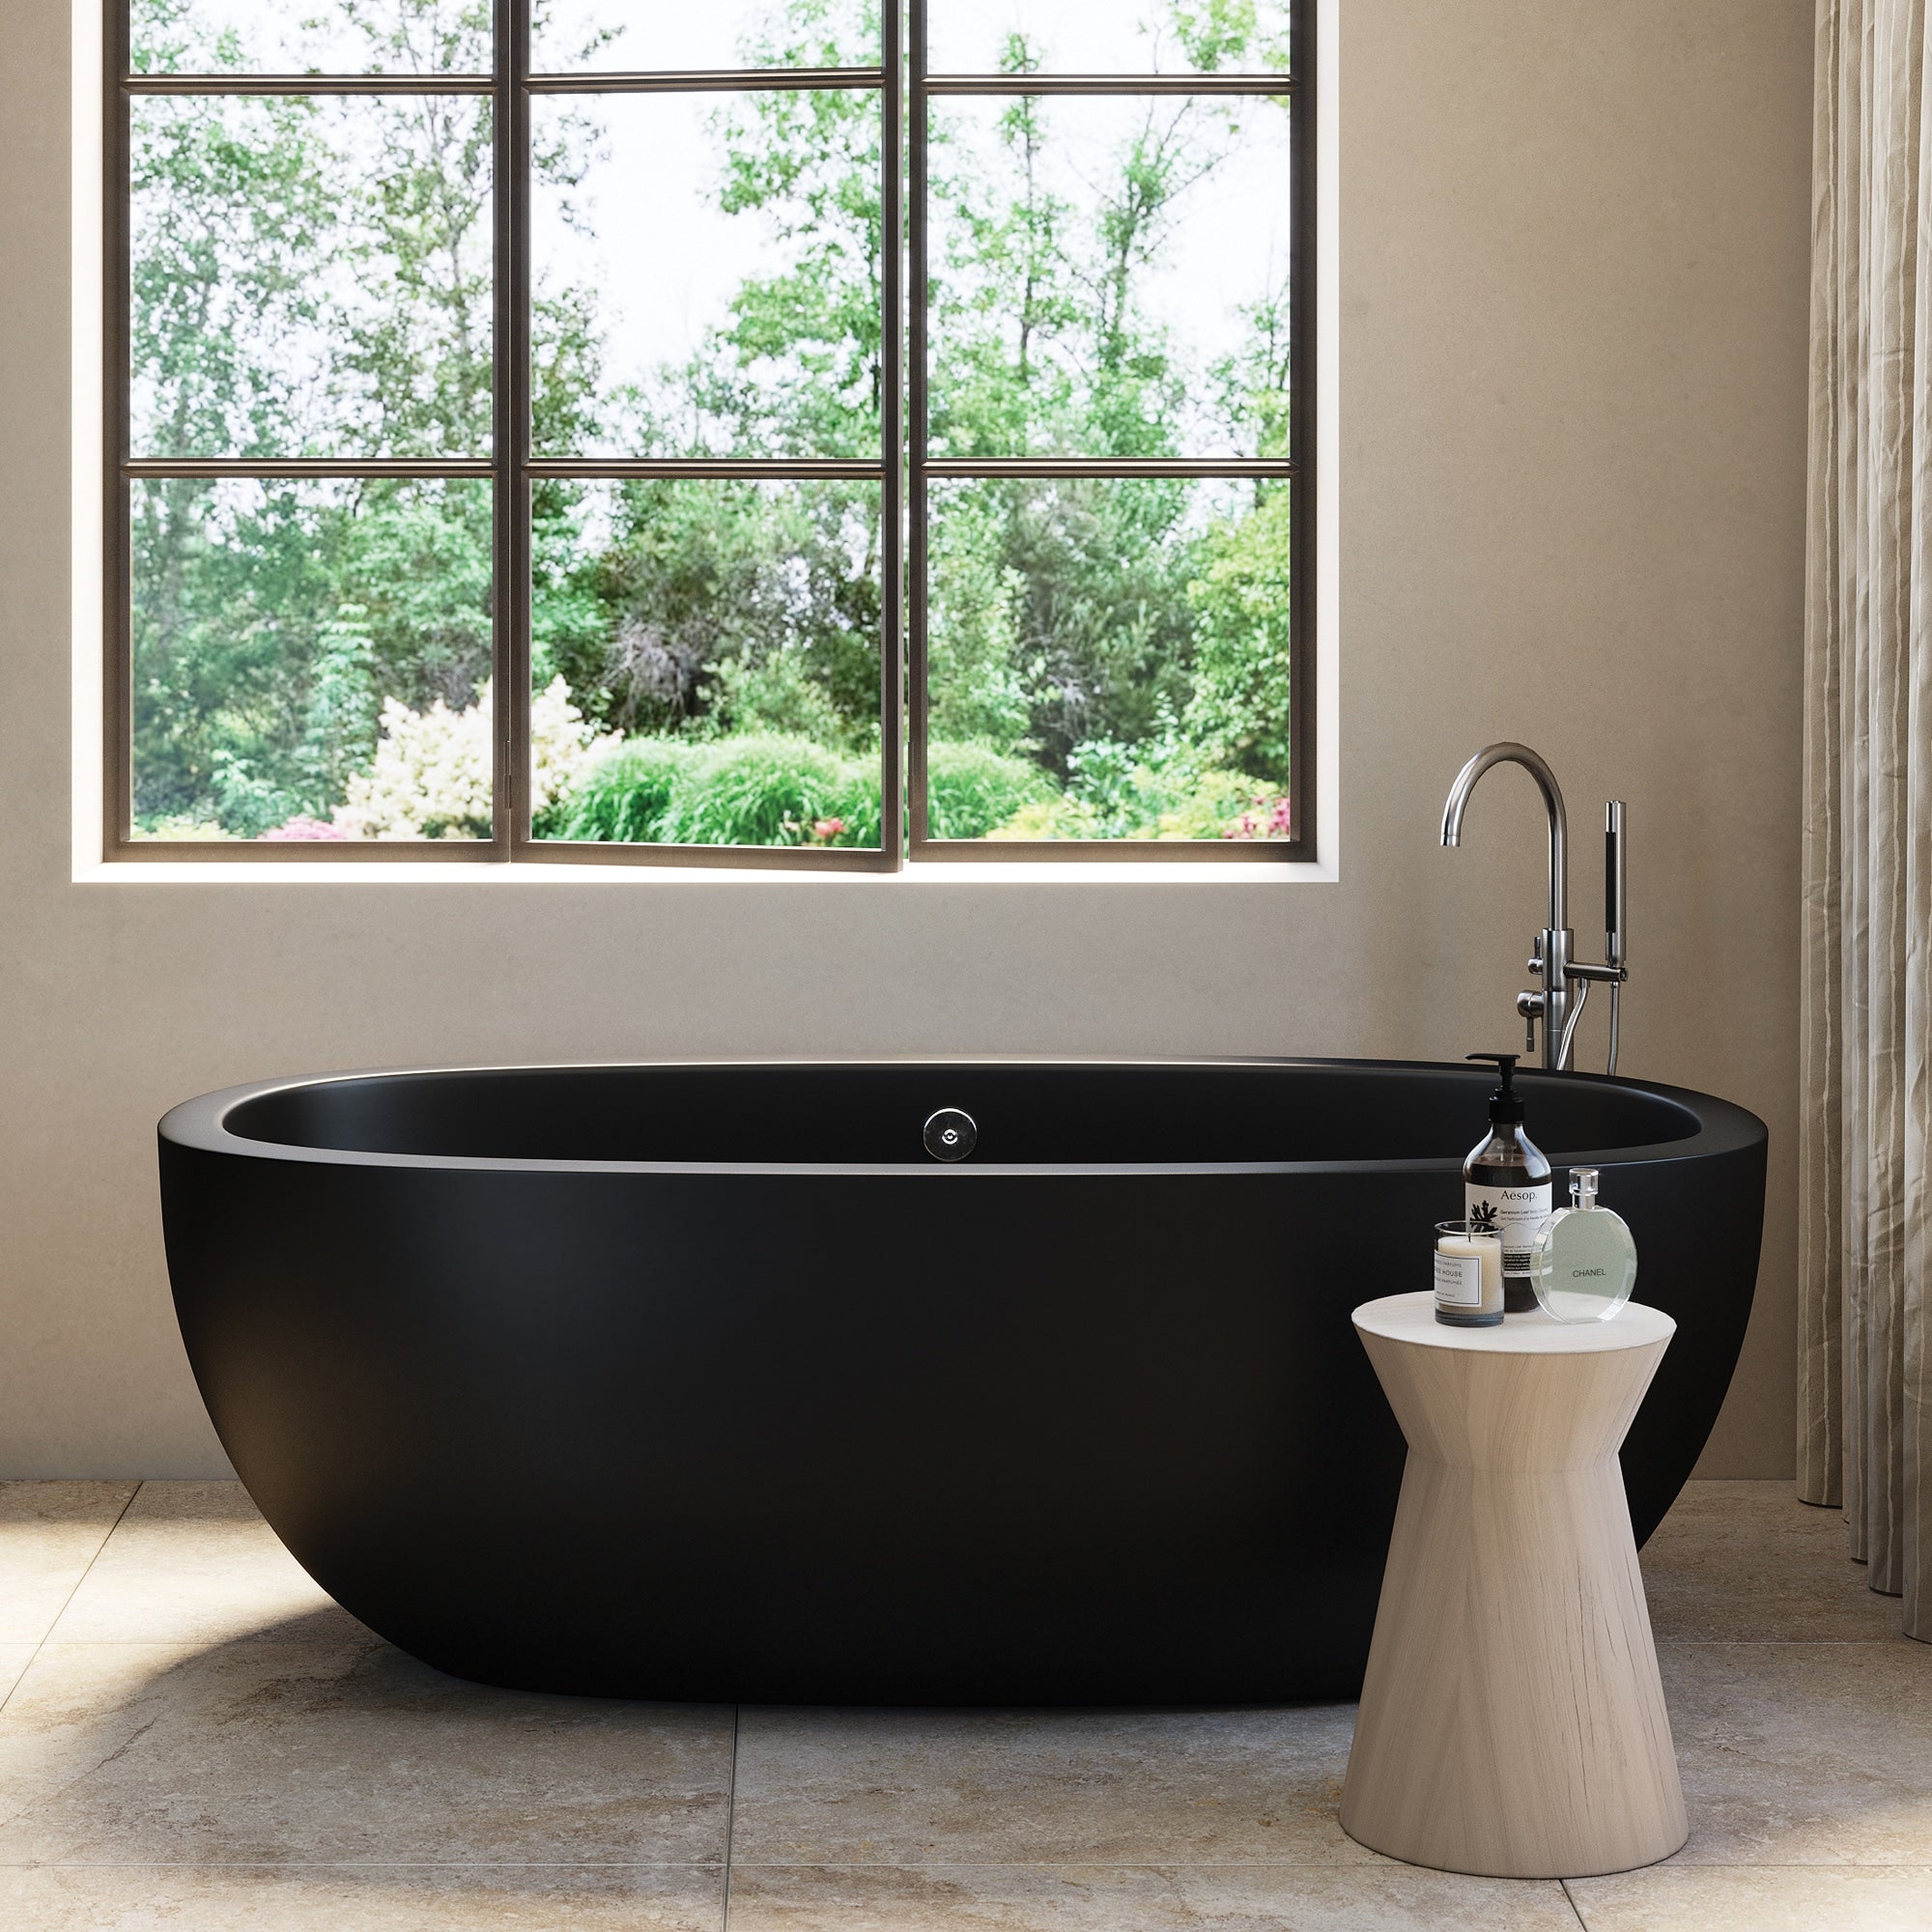 Native Trails NST7236-C Avalon 72 Freestanding Bathtub in Charcoal